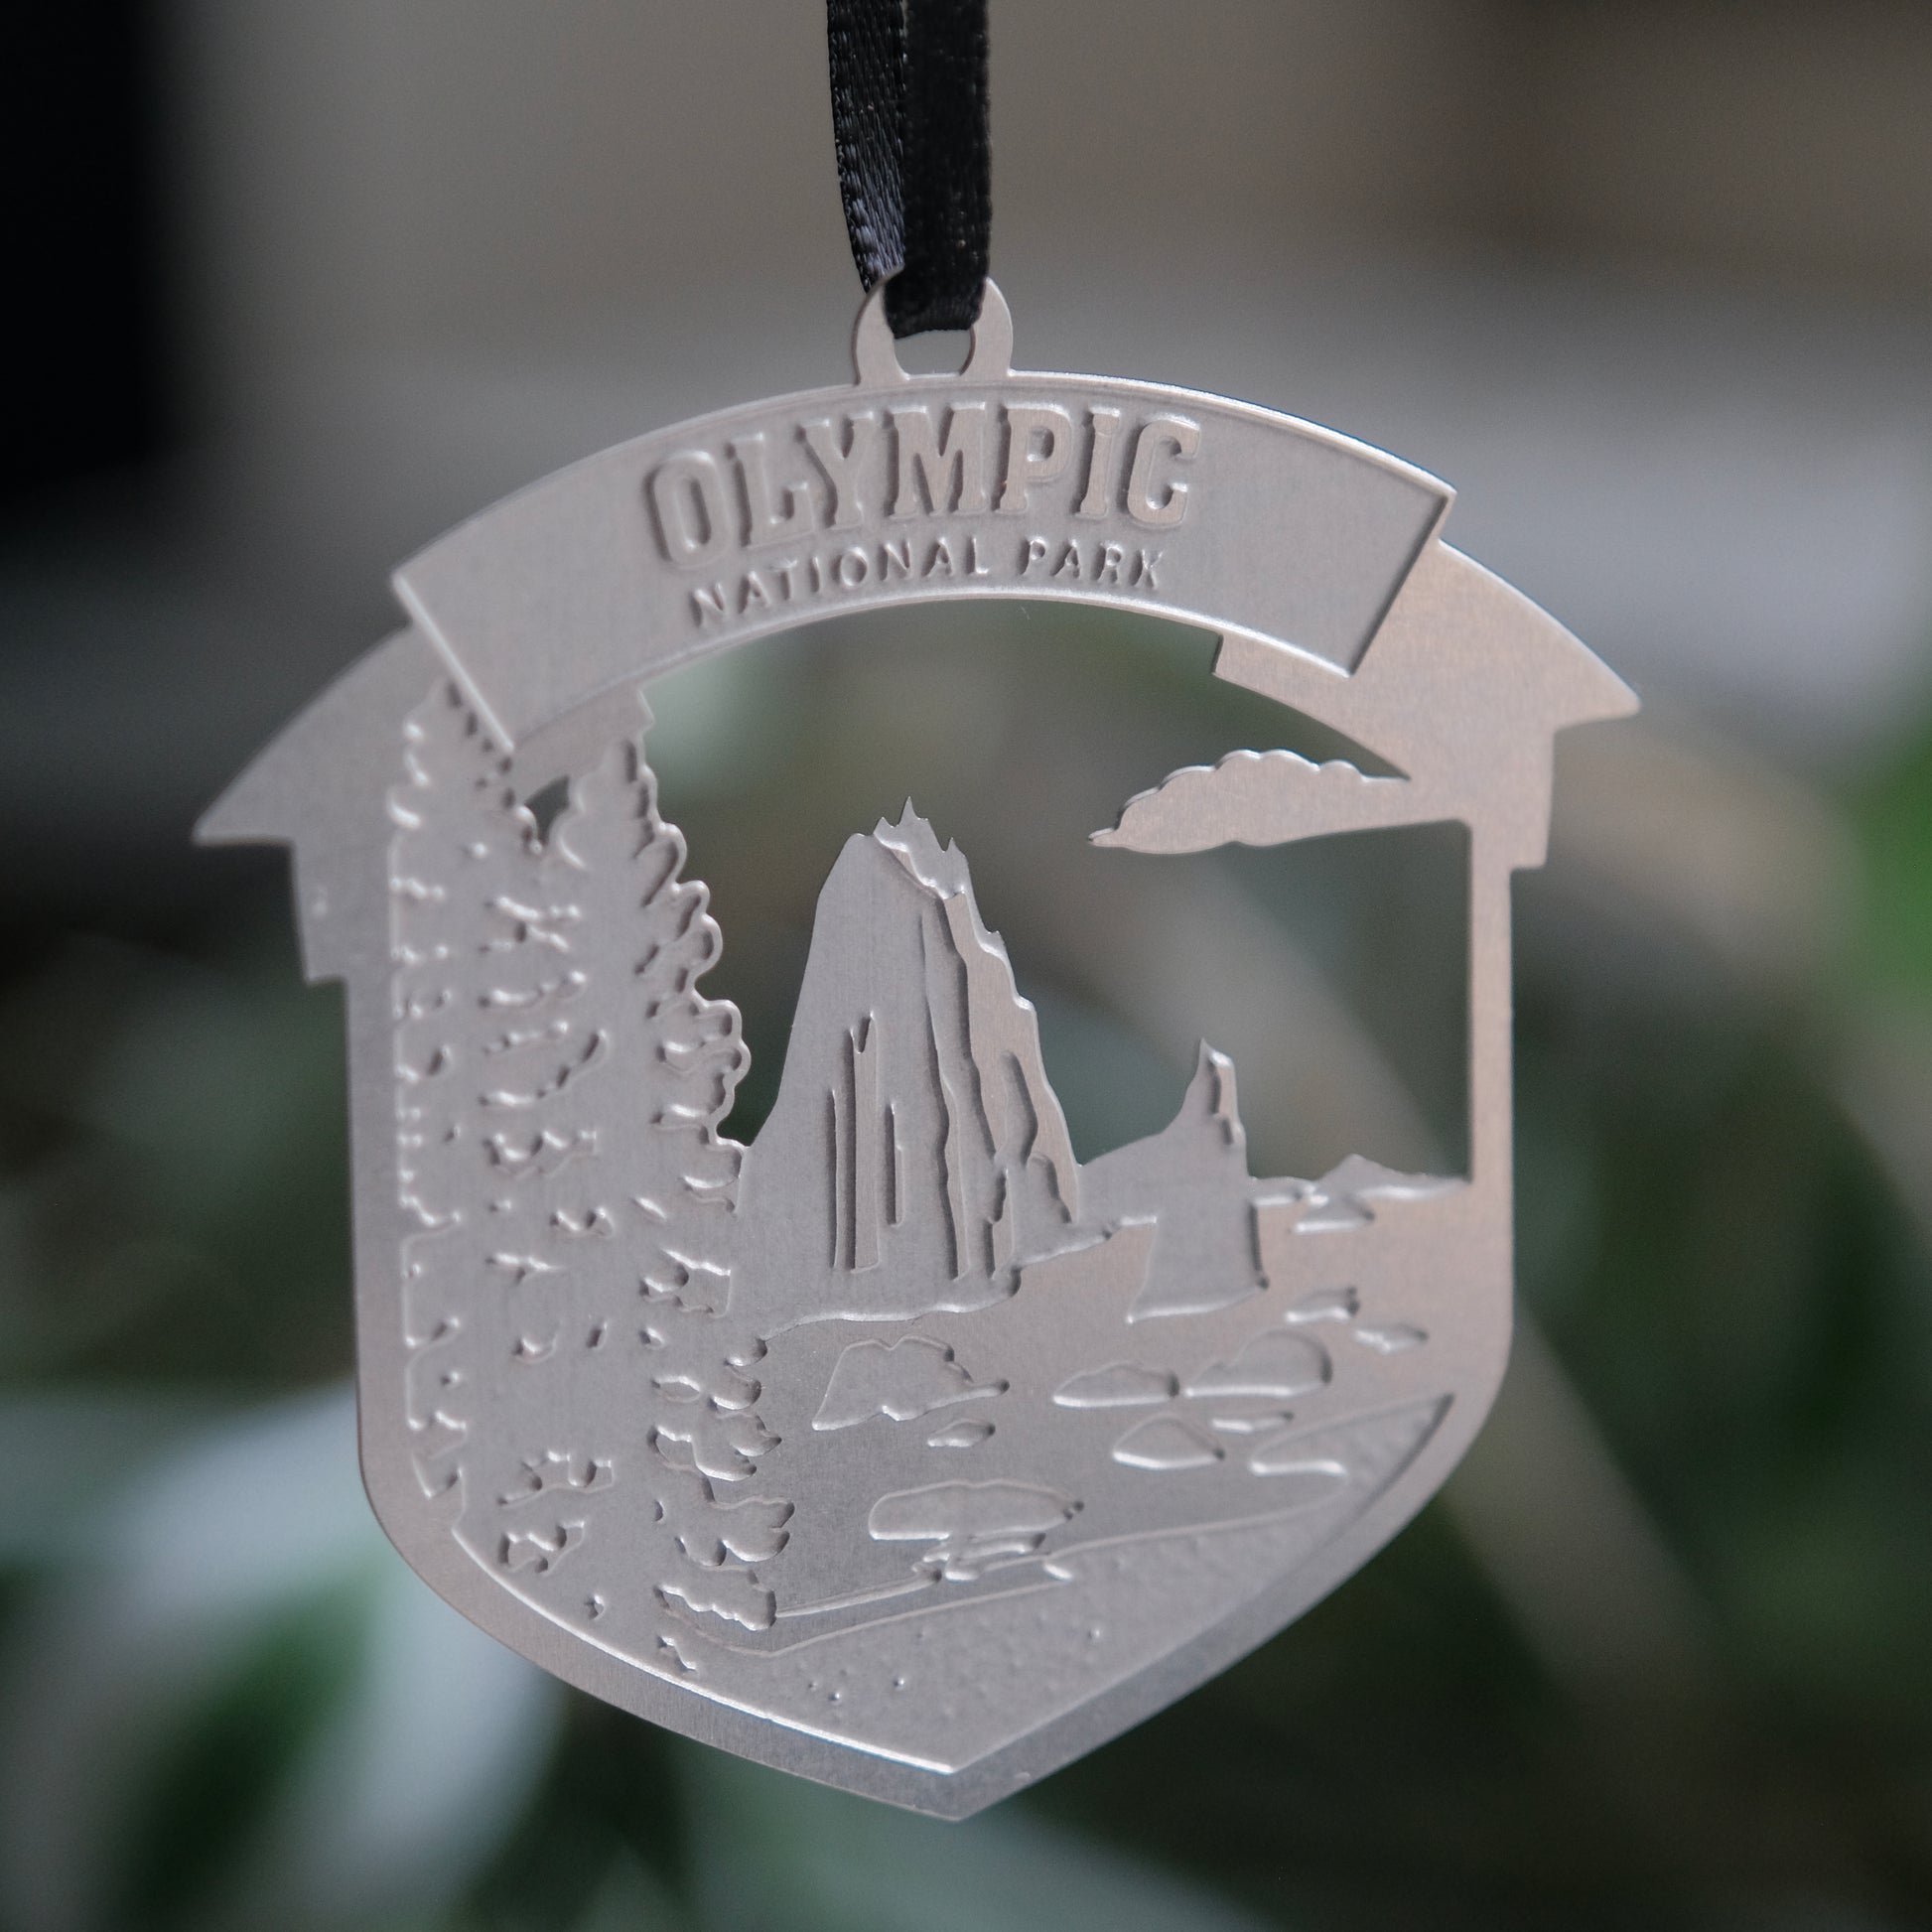 National Park Gift - Olympic National Park Ornament